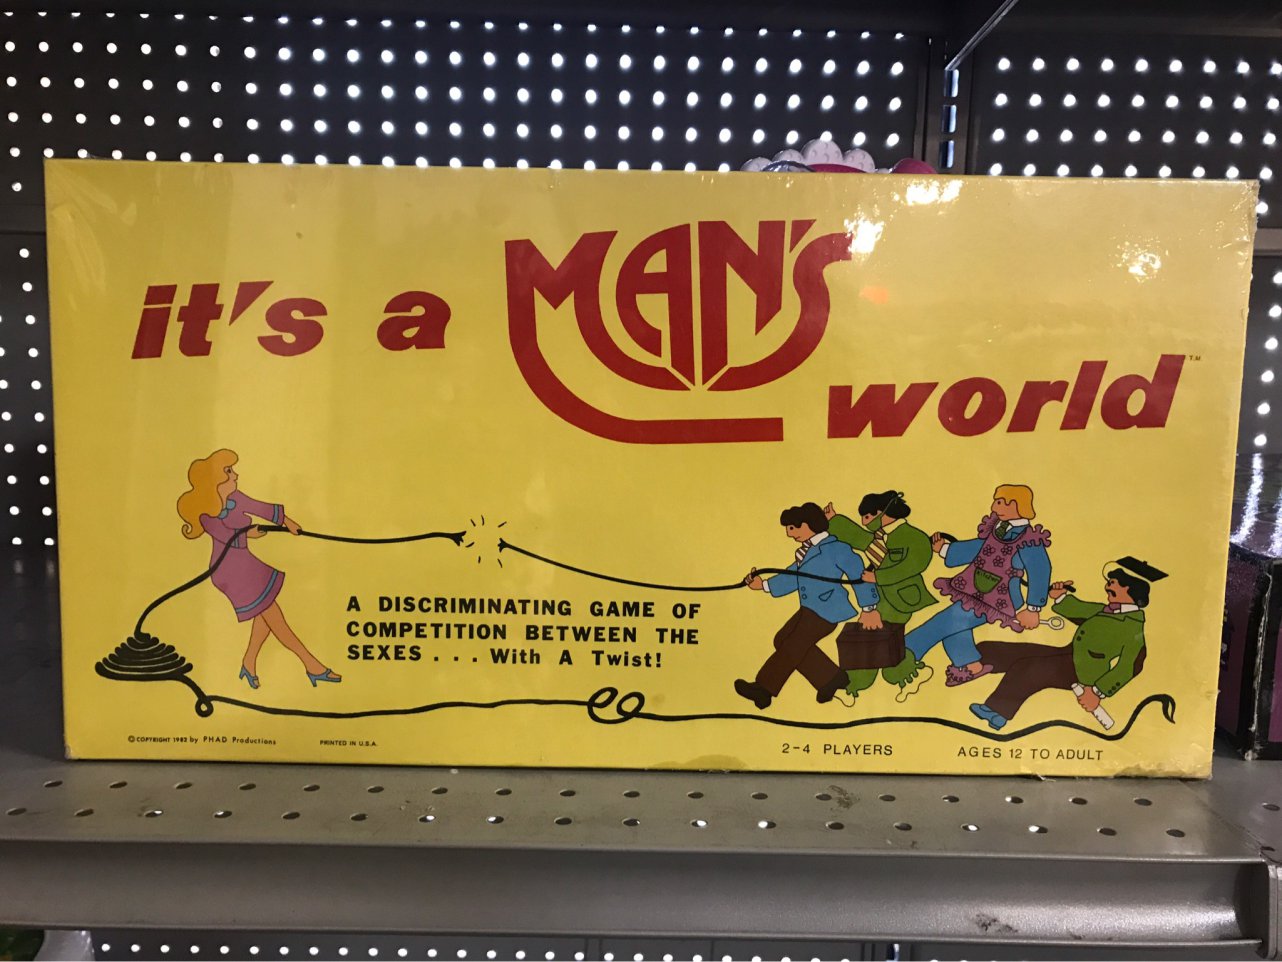 thrift store hampden park - it's a Mworld Cd 25 Aulas 988 A Discriminating Game Of Competition Between The Sexes... With A Twist! O Copyright 19by Phad Productions Pented In Usa 24 Players A Ges 12 To Adult